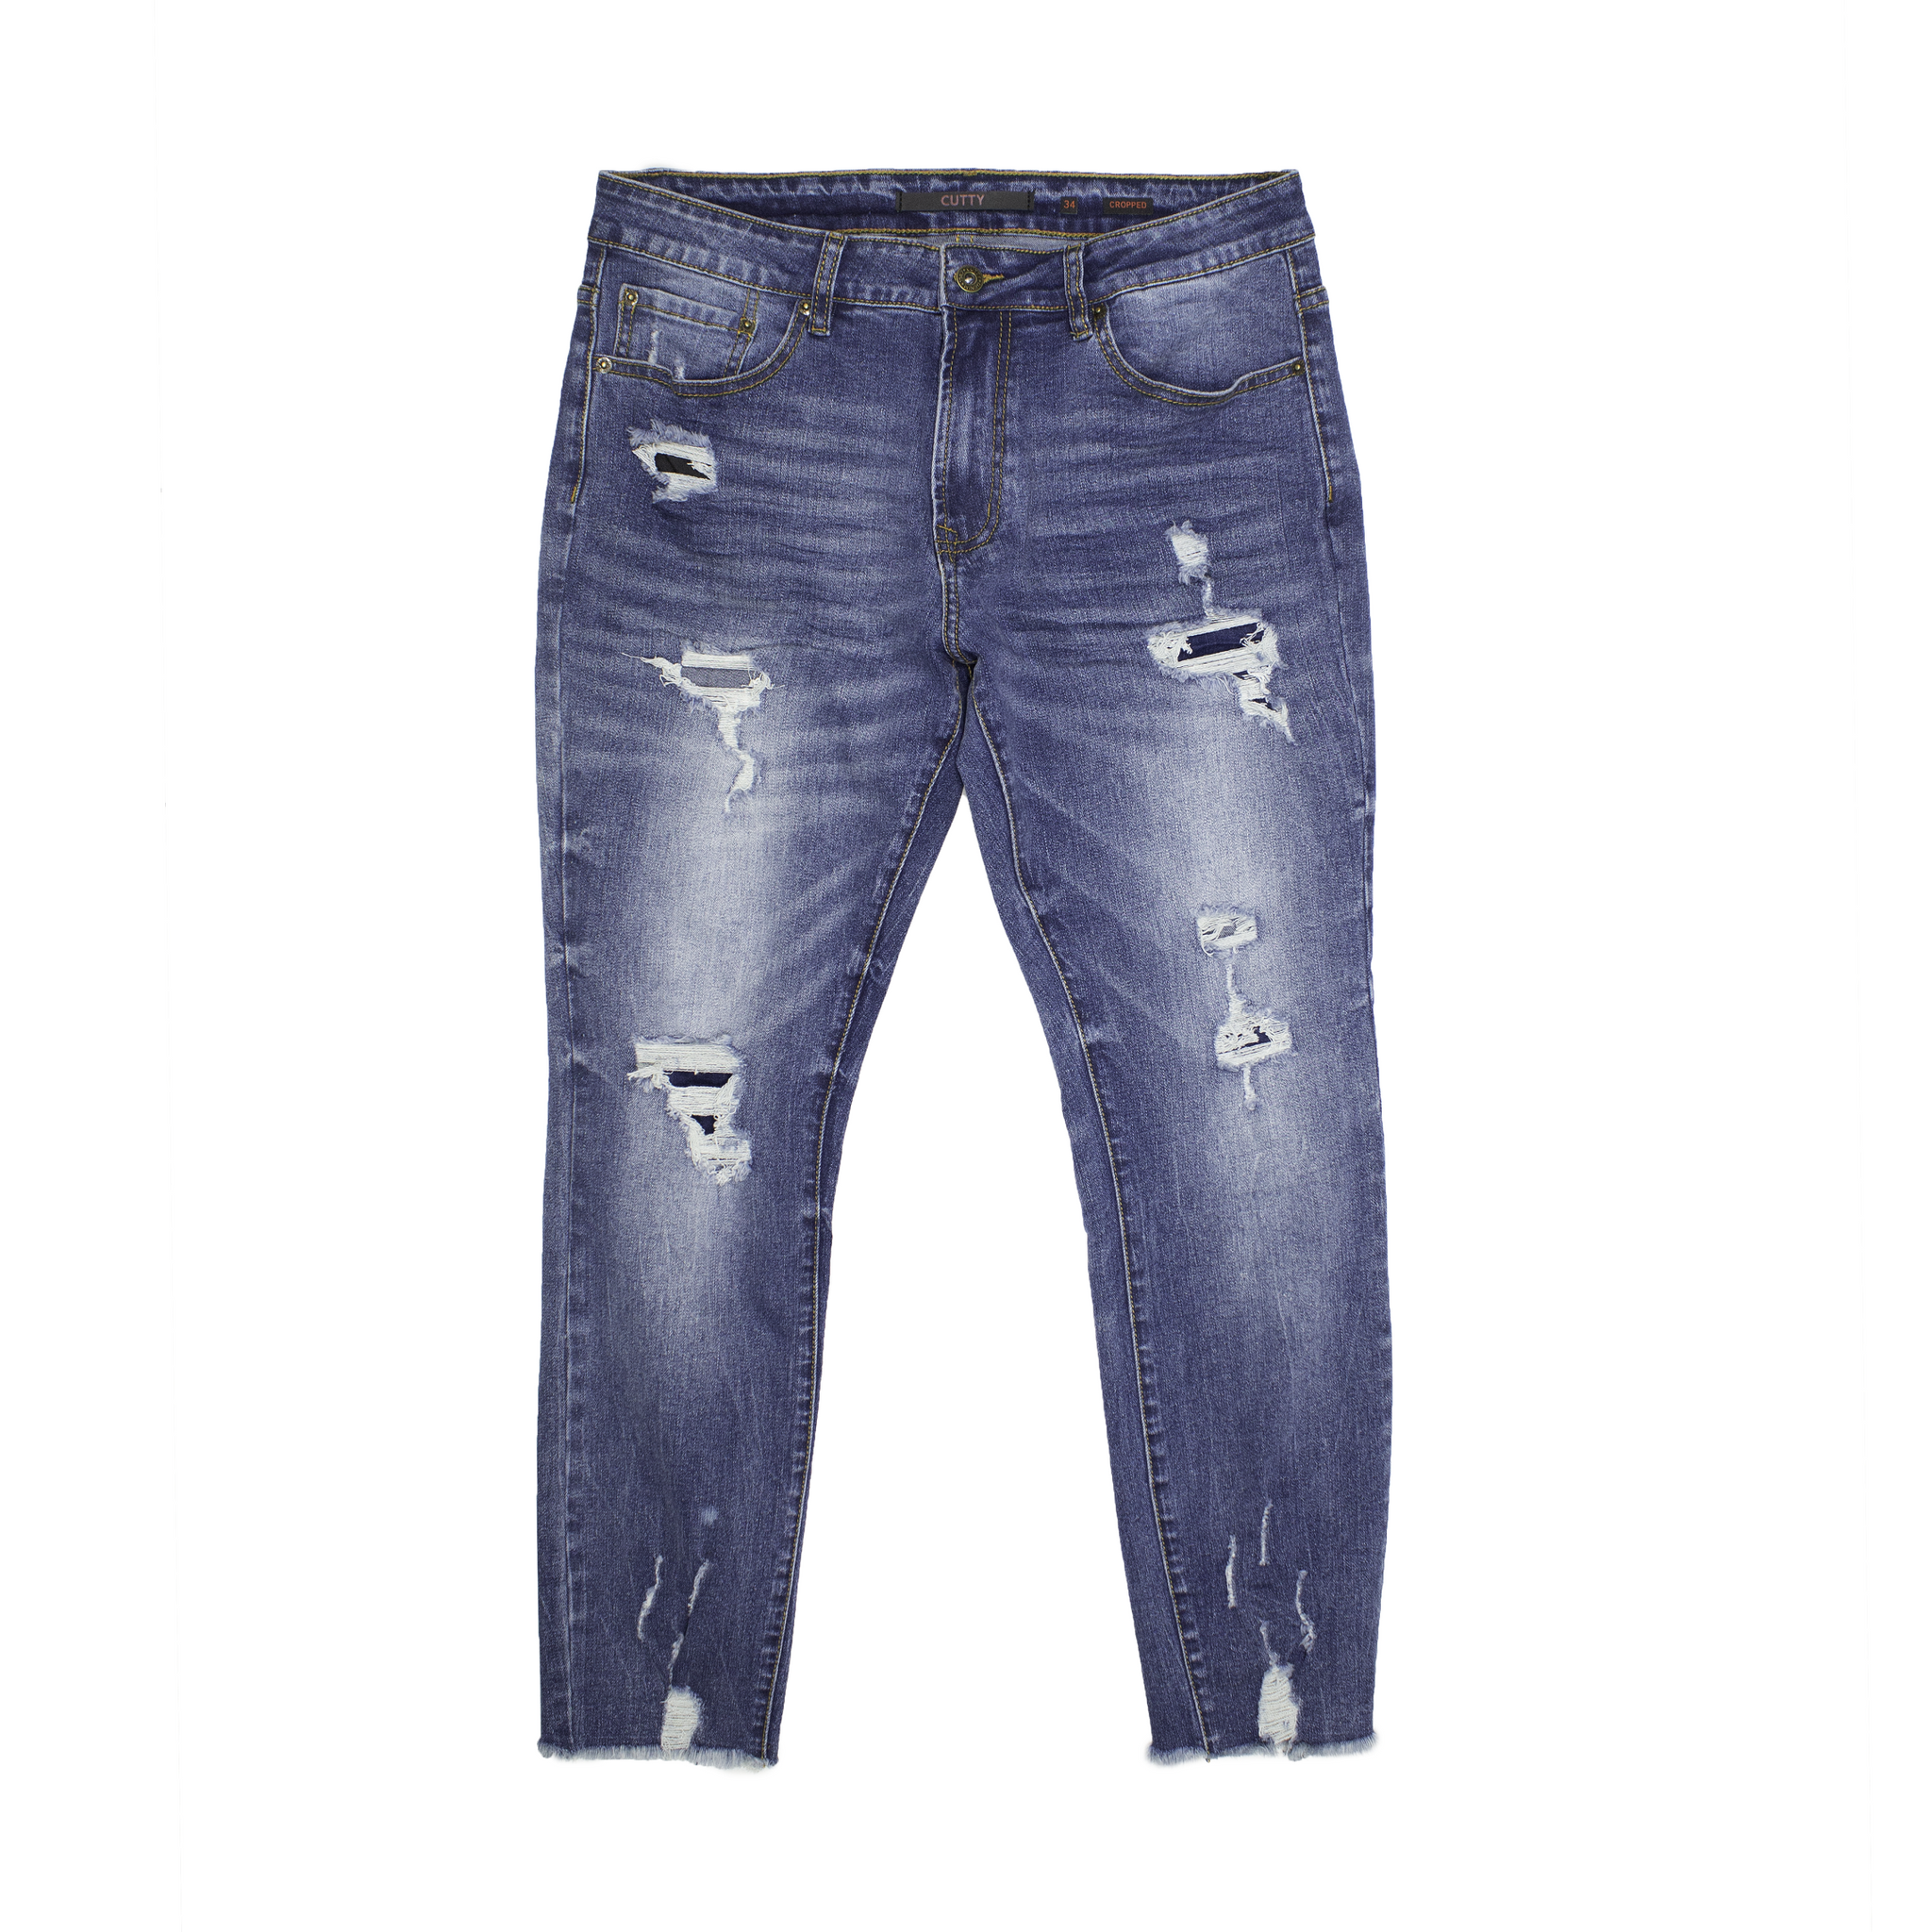 Cutty Denim Tower Jeans On Sale Now_Tower Mens Jeans sold online By Just Denim_R100 Bucks Off Sale_Shop Now_Just Denim South Africa